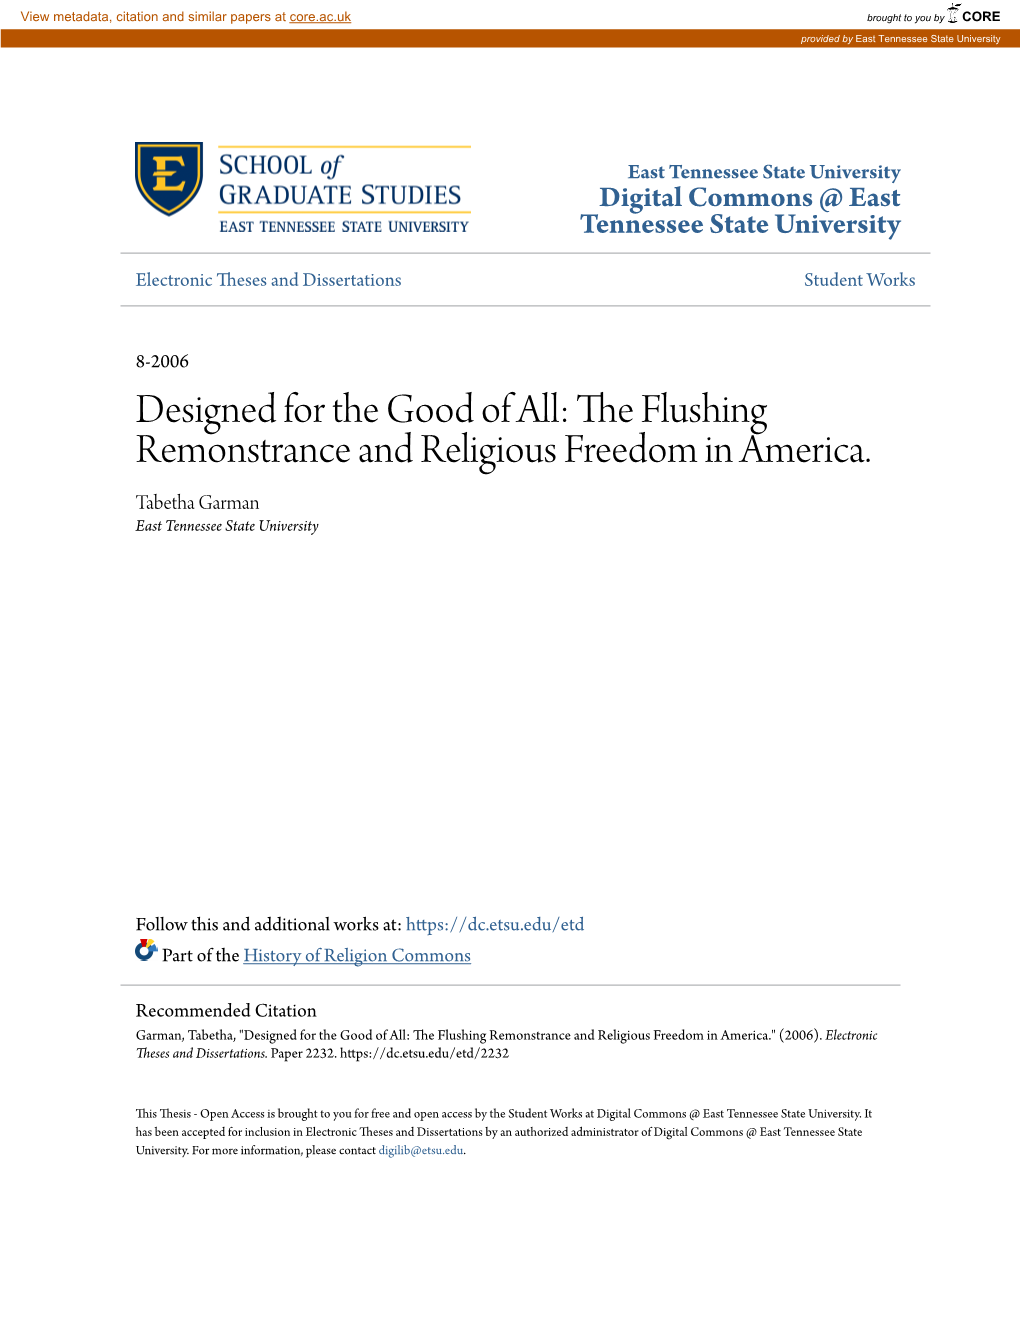 The Flushing Remonstrance and Religious Freedom in America." (2006)